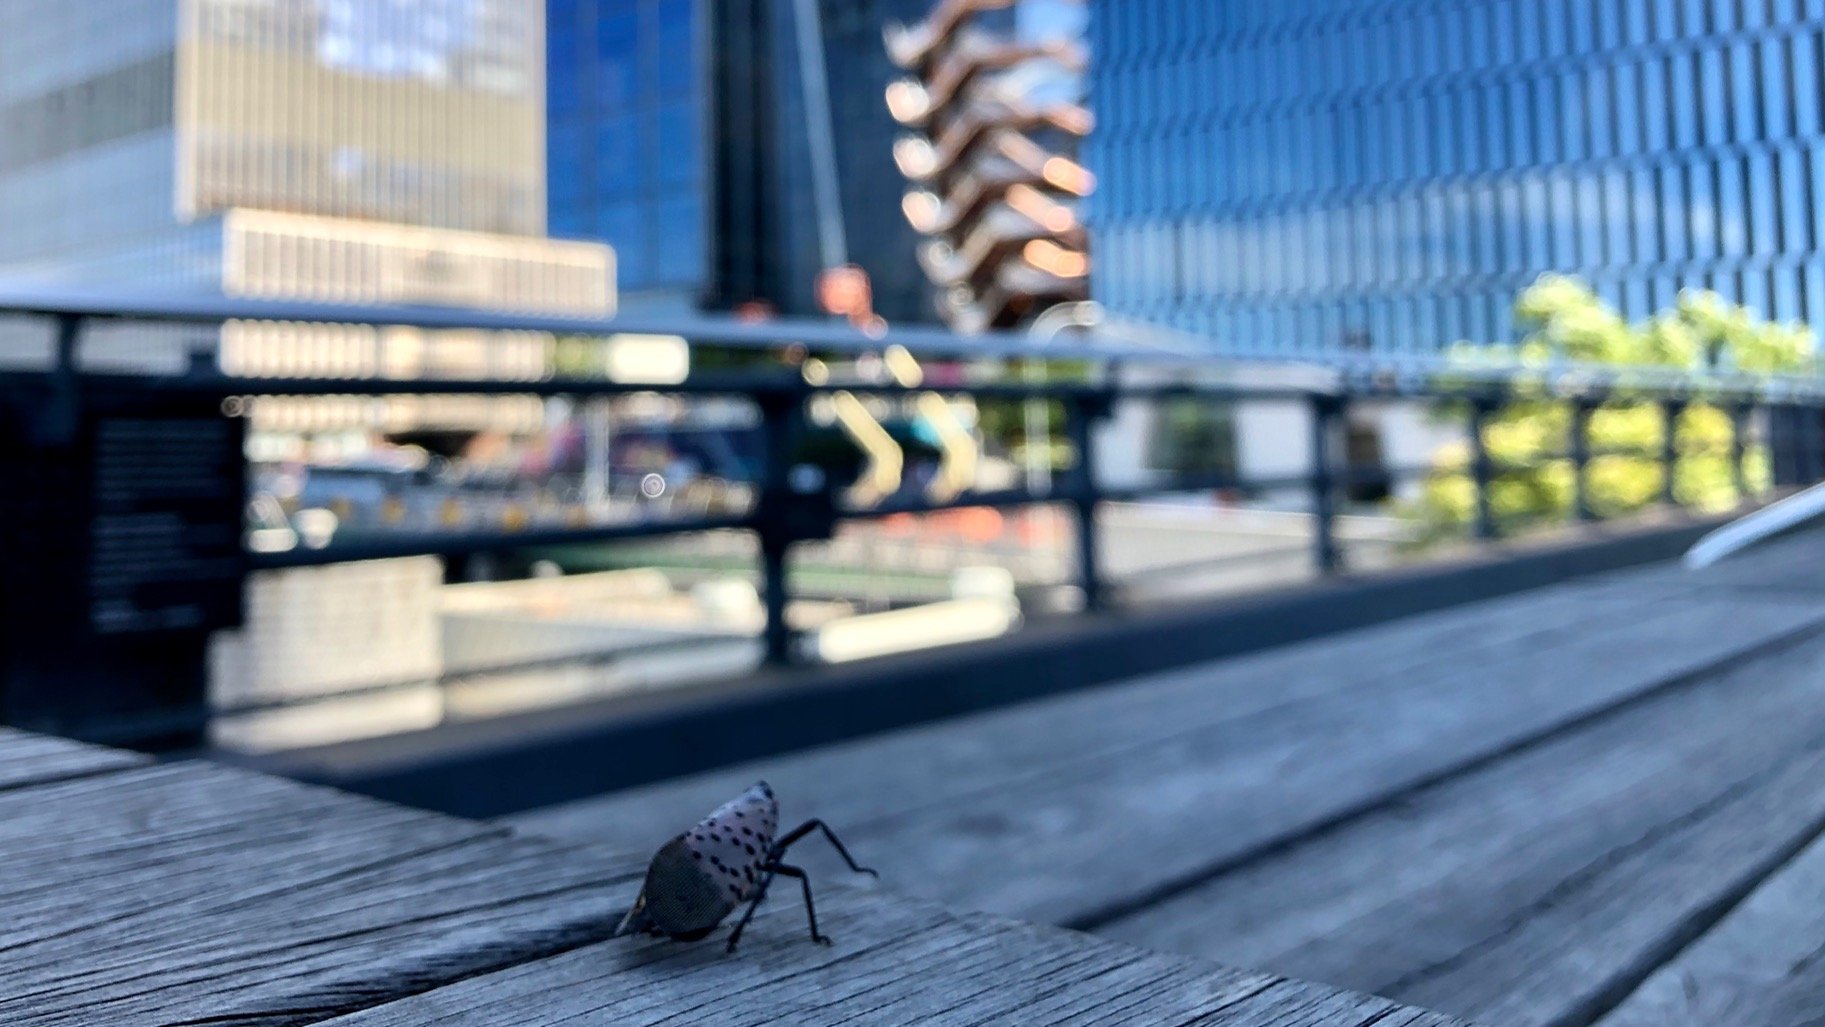  A bug’s big day out. Justine noticed this little guy on one of the benches. 